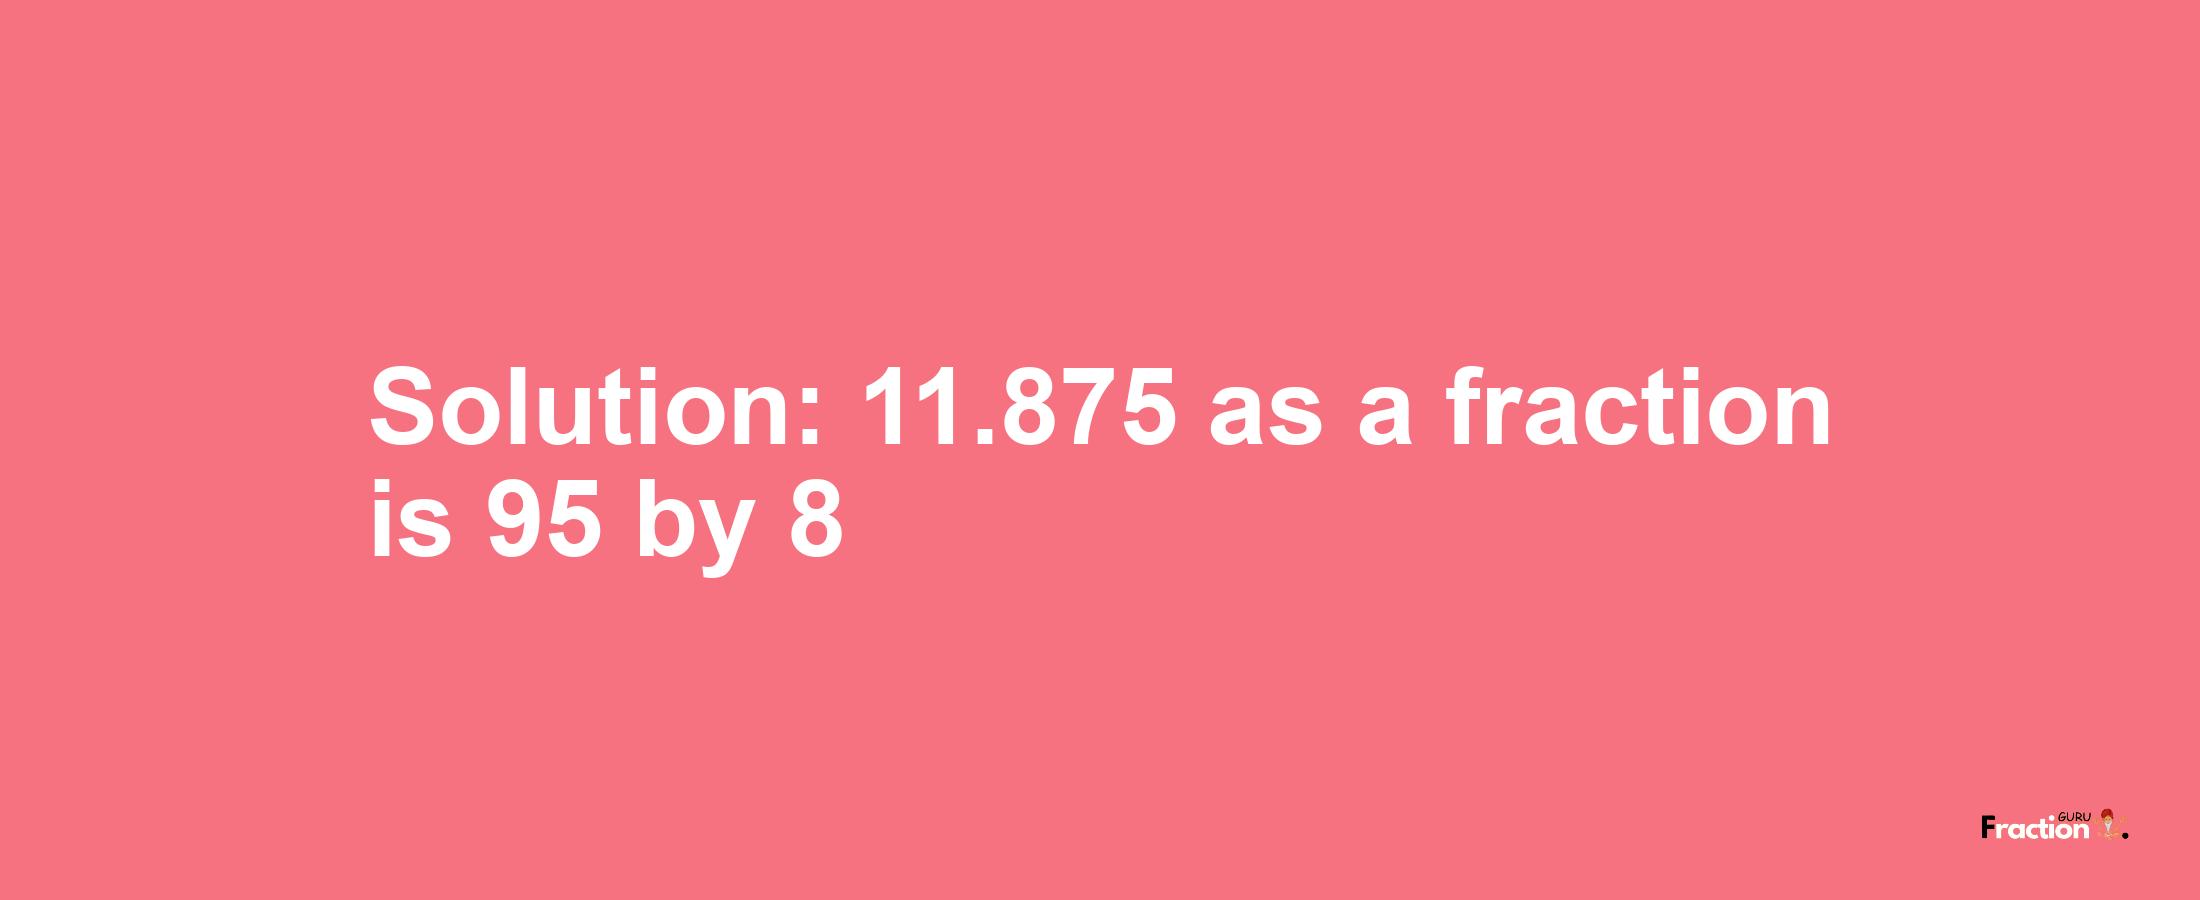 Solution:11.875 as a fraction is 95/8